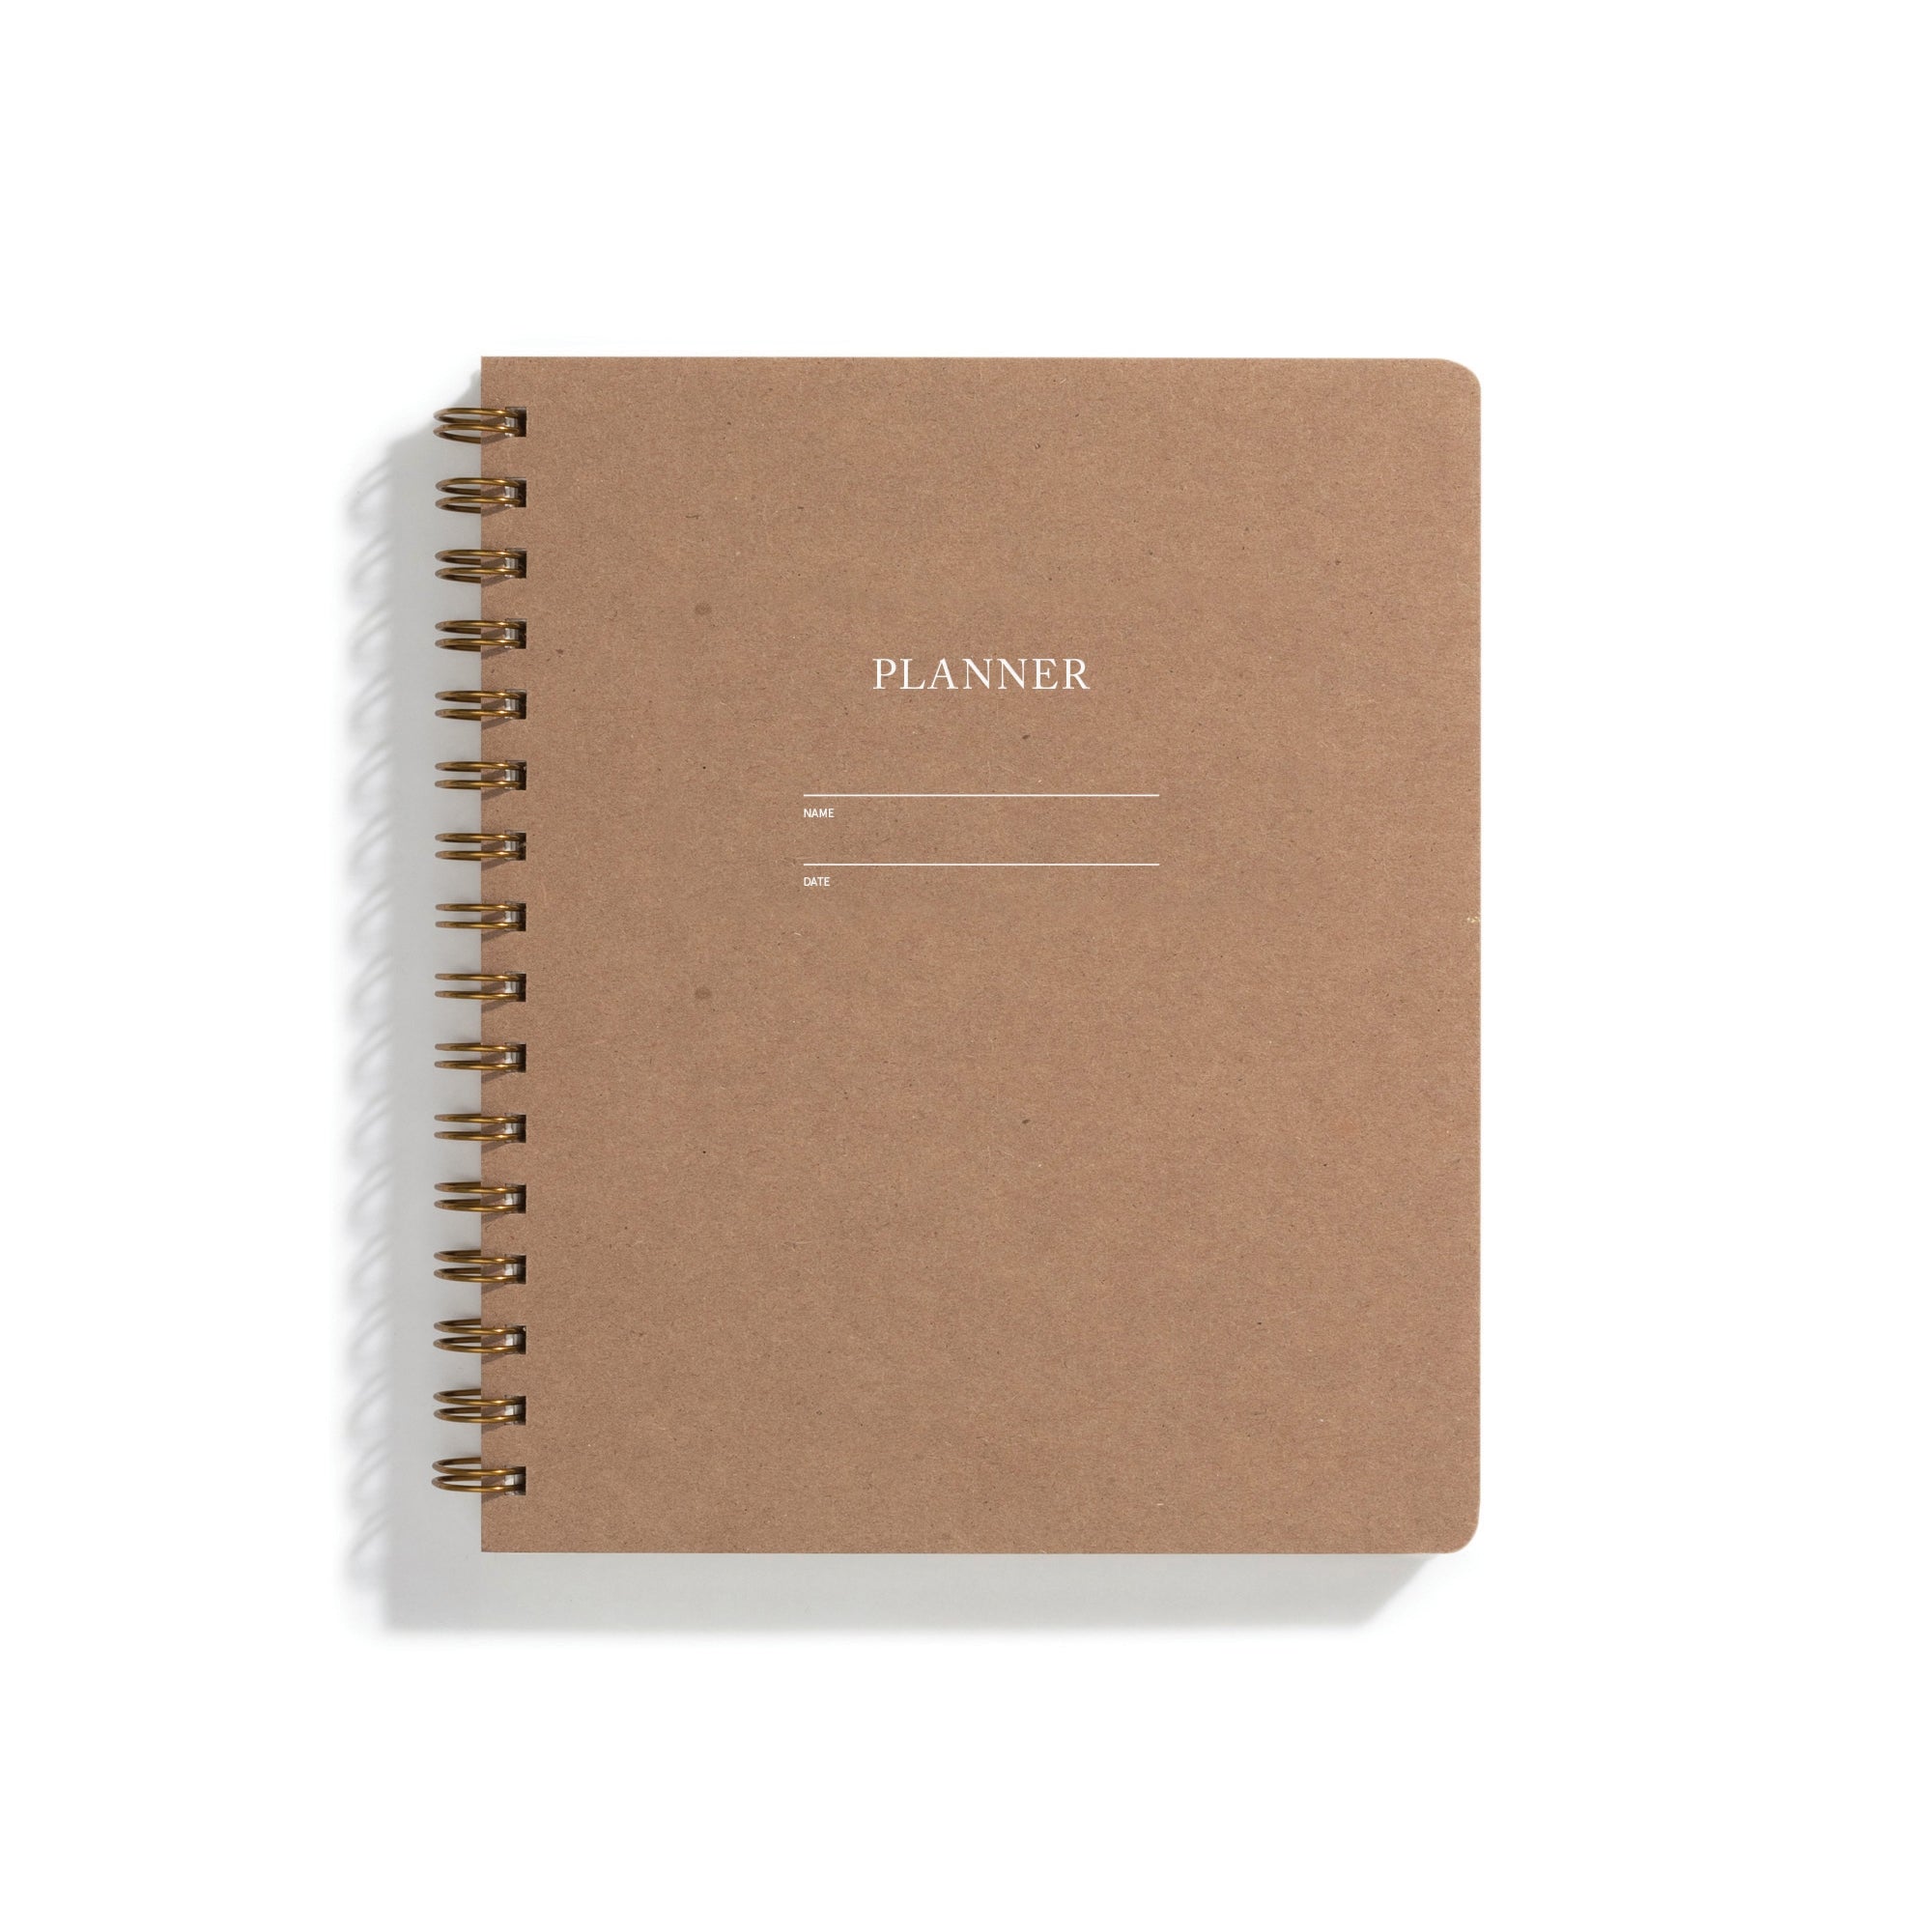 Image of brown cover with letter pressed text says, “Planner”. “Name” and “Date” with lines for writing. Coiled binding on left side.